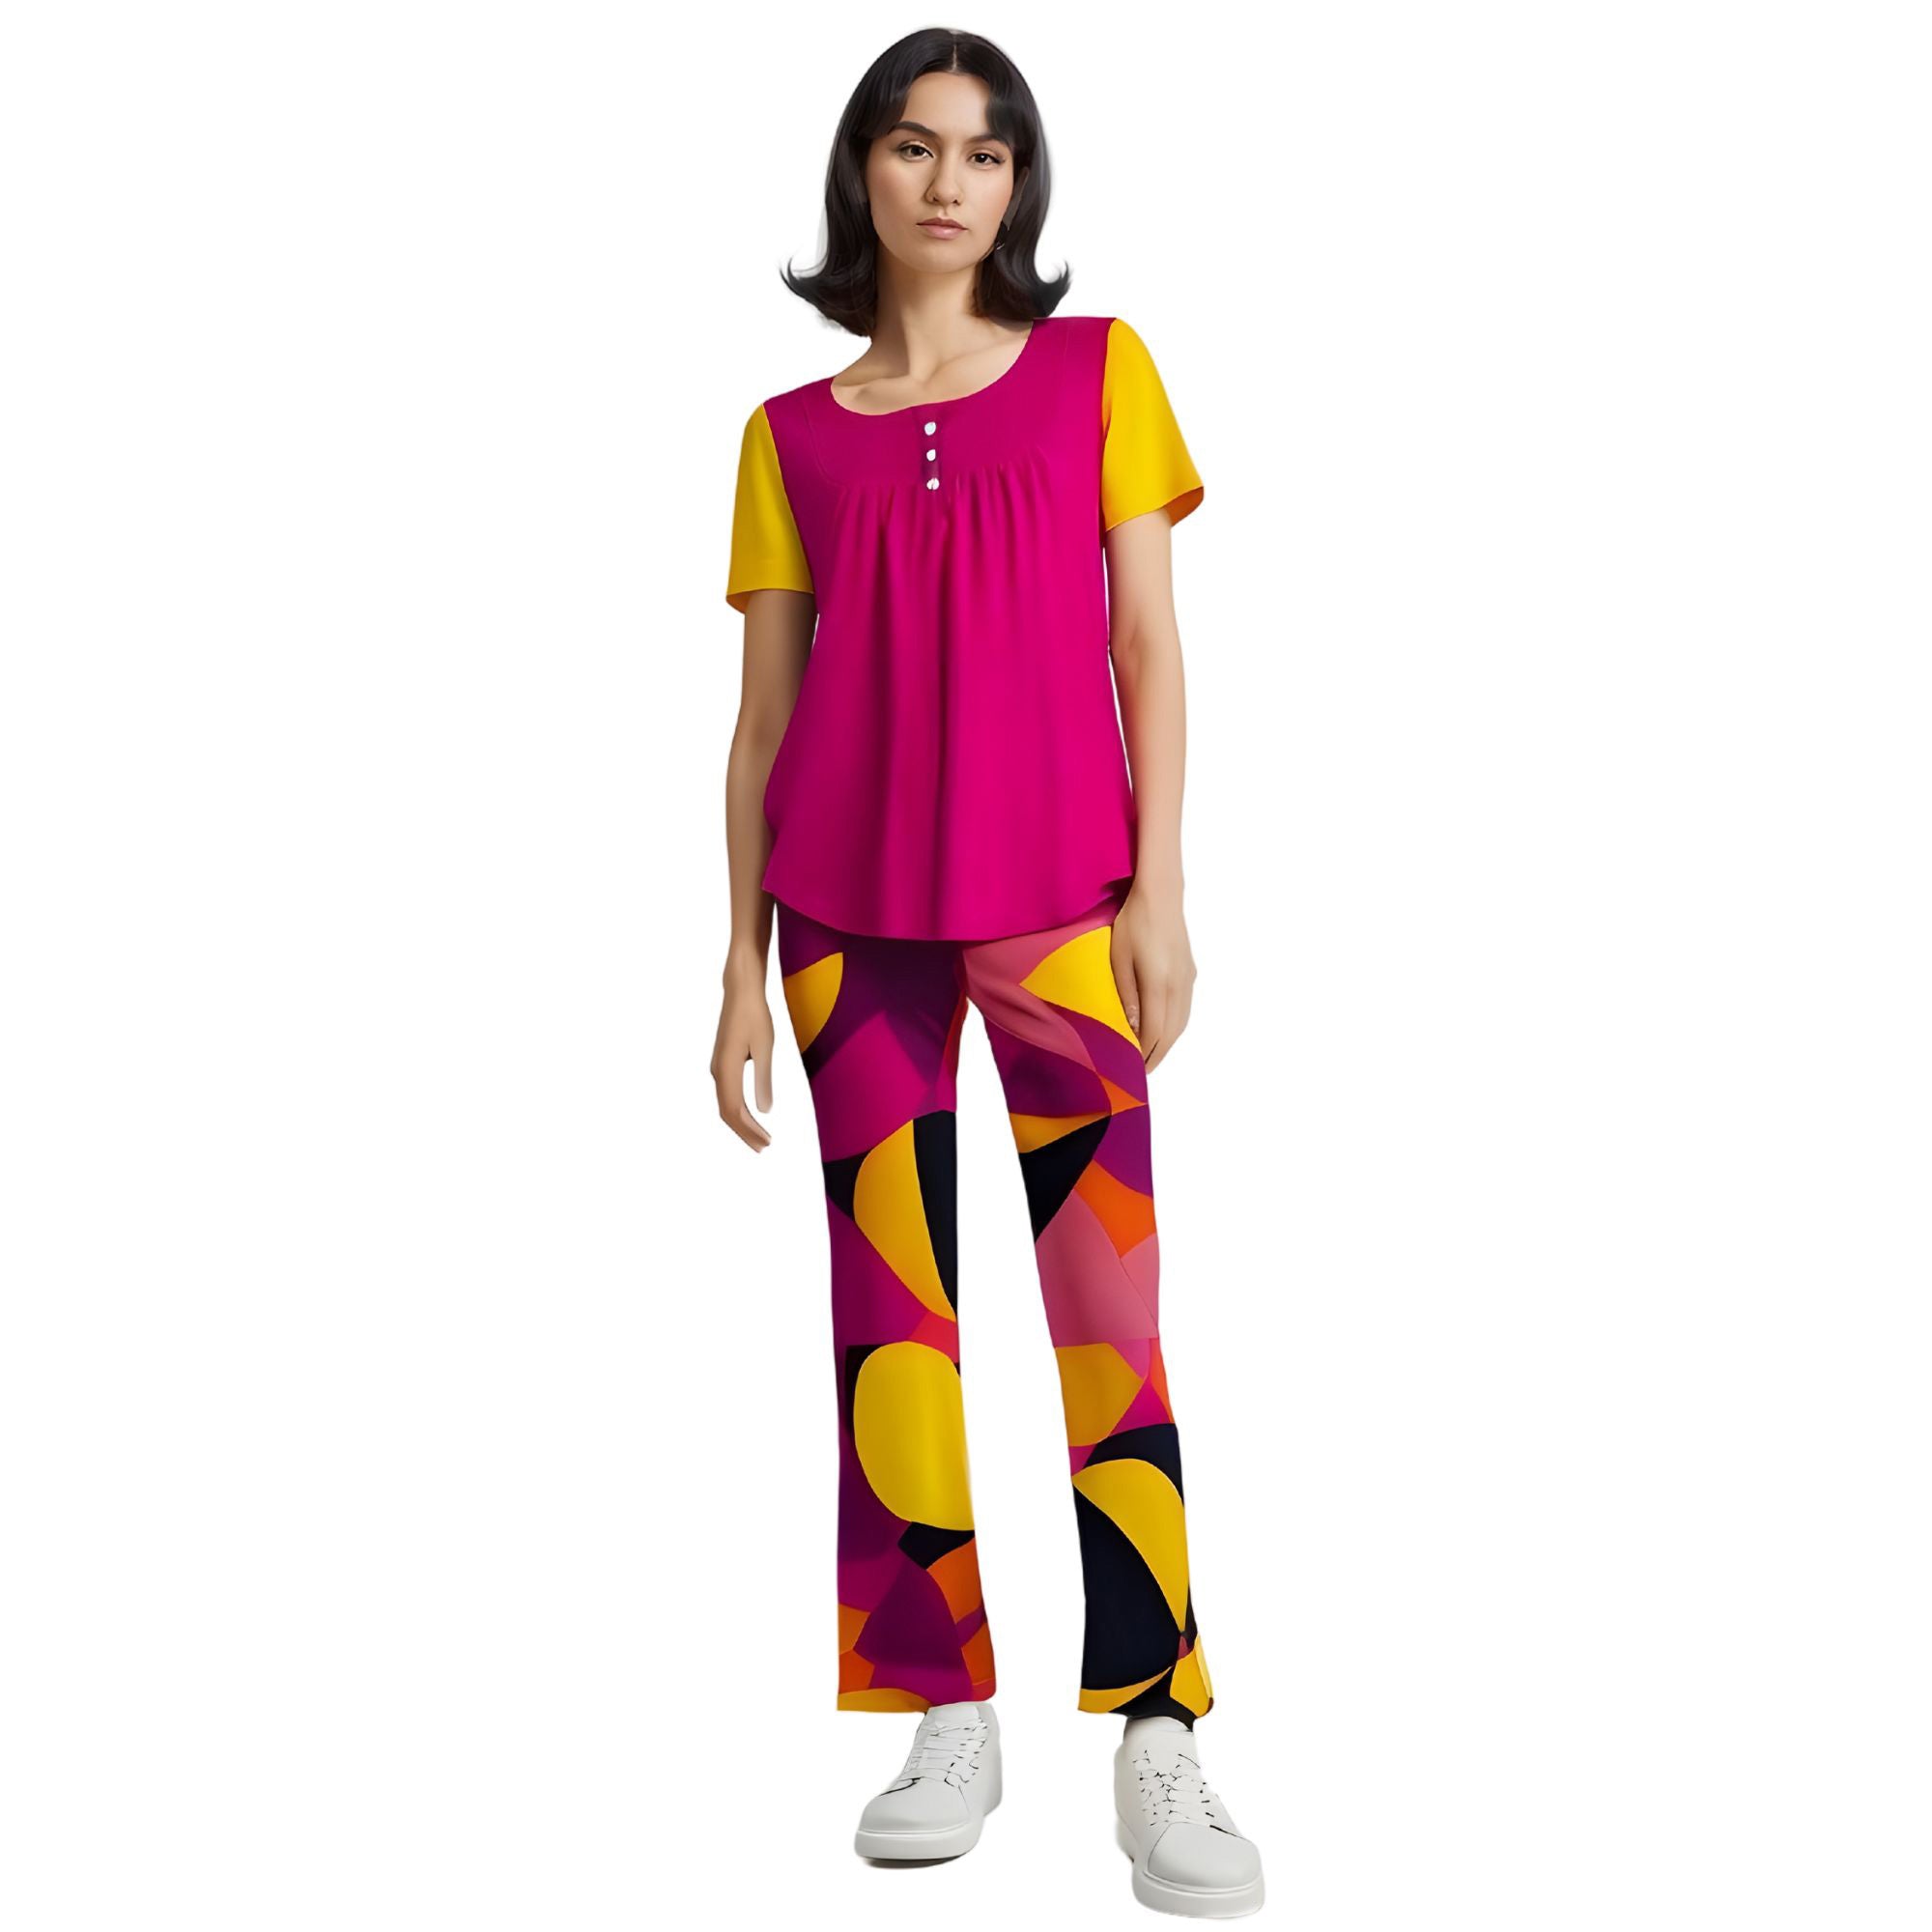 Airline Series 929 Flare Pants - Abstract Retro Pop Art Funky Mod 70's Vibrant Bold Disco Streetwear Bell Bottoms Women's Legging Plus Sizes Blissfully Brand